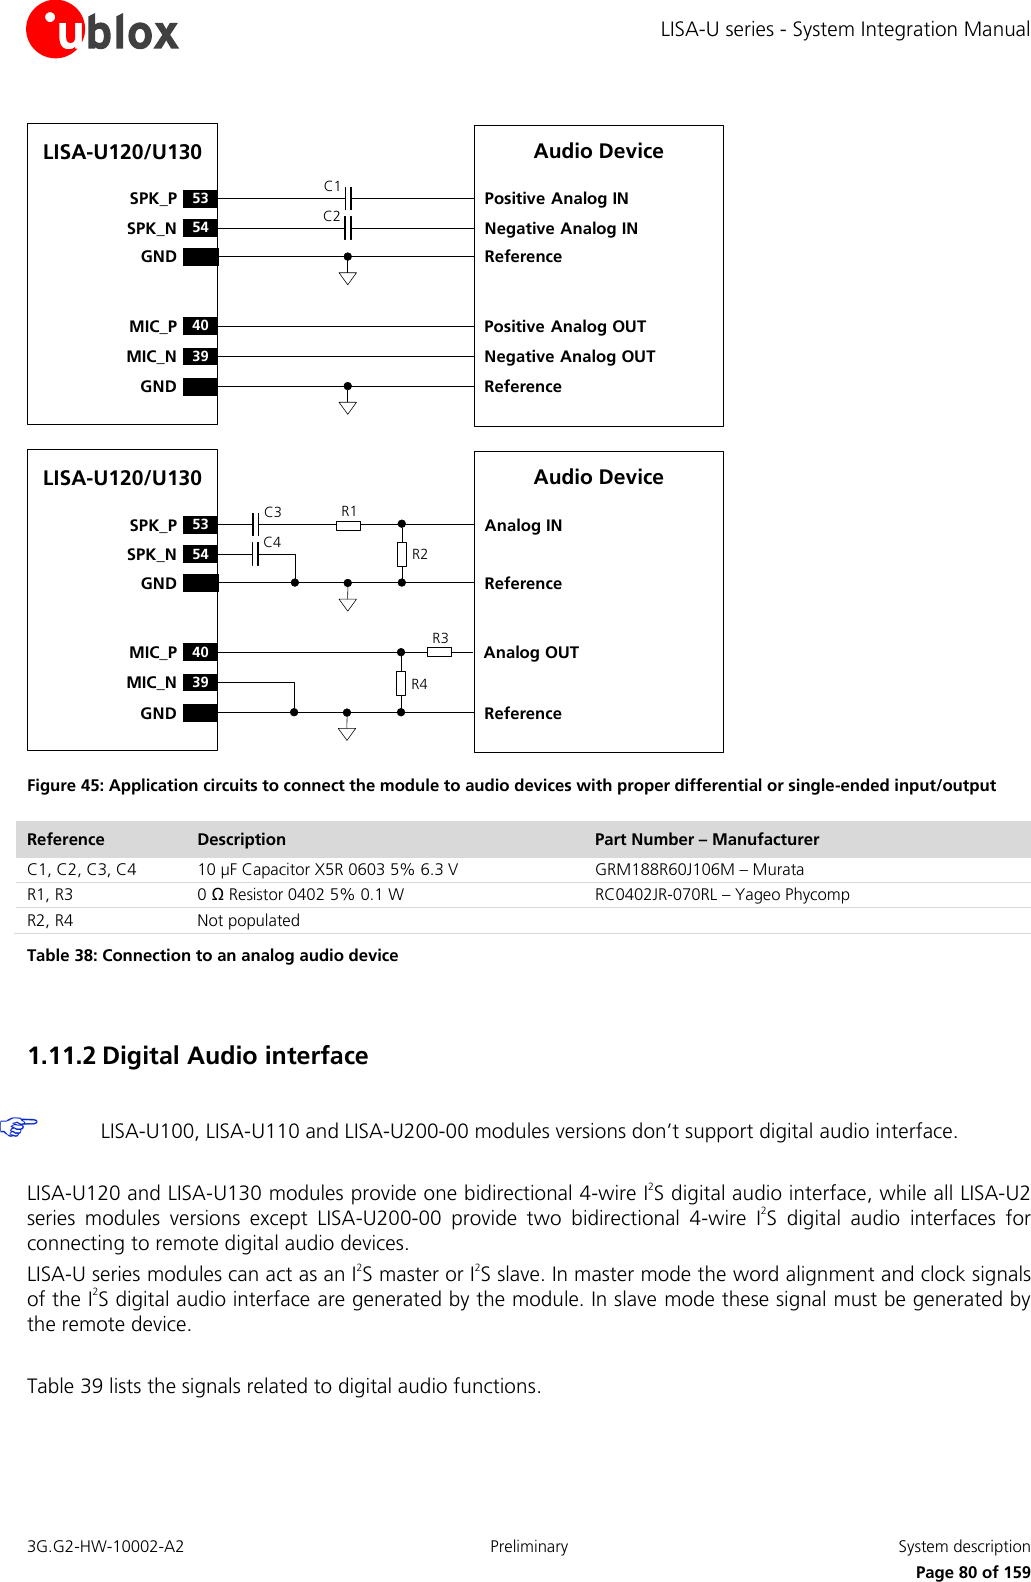 LISA-U series - System Integration Manual 3G.G2-HW-10002-A2  Preliminary  System description      Page 80 of 159 LISA-U120/U130C1C254SPK_N53SPK_PGND40MIC_PGNDNegative Analog INPositive Analog INNegative Analog OUTPositive Analog OUTAudio DeviceReferenceReference39MIC_NLISA-U120/U13054SPK_N53SPK_PGND40MIC_PGNDAnalog INAudio DeviceReferenceReference39MIC_NAnalog OUTC3C4 R2R1R4R3 Figure 45: Application circuits to connect the module to audio devices with proper differential or single-ended input/output Reference Description Part Number – Manufacturer C1, C2, C3, C4 10 µF Capacitor X5R 0603 5% 6.3 V  GRM188R60J106M – Murata R1, R3 0 Ω Resistor 0402 5% 0.1 W  RC0402JR-070RL – Yageo Phycomp R2, R4 Not populated  Table 38: Connection to an analog audio device  1.11.2 Digital Audio interface    LISA-U100, LISA-U110 and LISA-U200-00 modules versions don’t support digital audio interface.  LISA-U120 and LISA-U130 modules provide one bidirectional 4-wire I2S digital audio interface, while all LISA-U2 series  modules  versions  except  LISA-U200-00  provide  two  bidirectional  4-wire  I2S  digital  audio  interfaces  for connecting to remote digital audio devices. LISA-U series modules can act as an I2S master or I2S slave. In master mode the word alignment and clock signals of the I2S digital audio interface are generated by the module. In slave mode these signal must be generated by the remote device.  Table 39 lists the signals related to digital audio functions.  